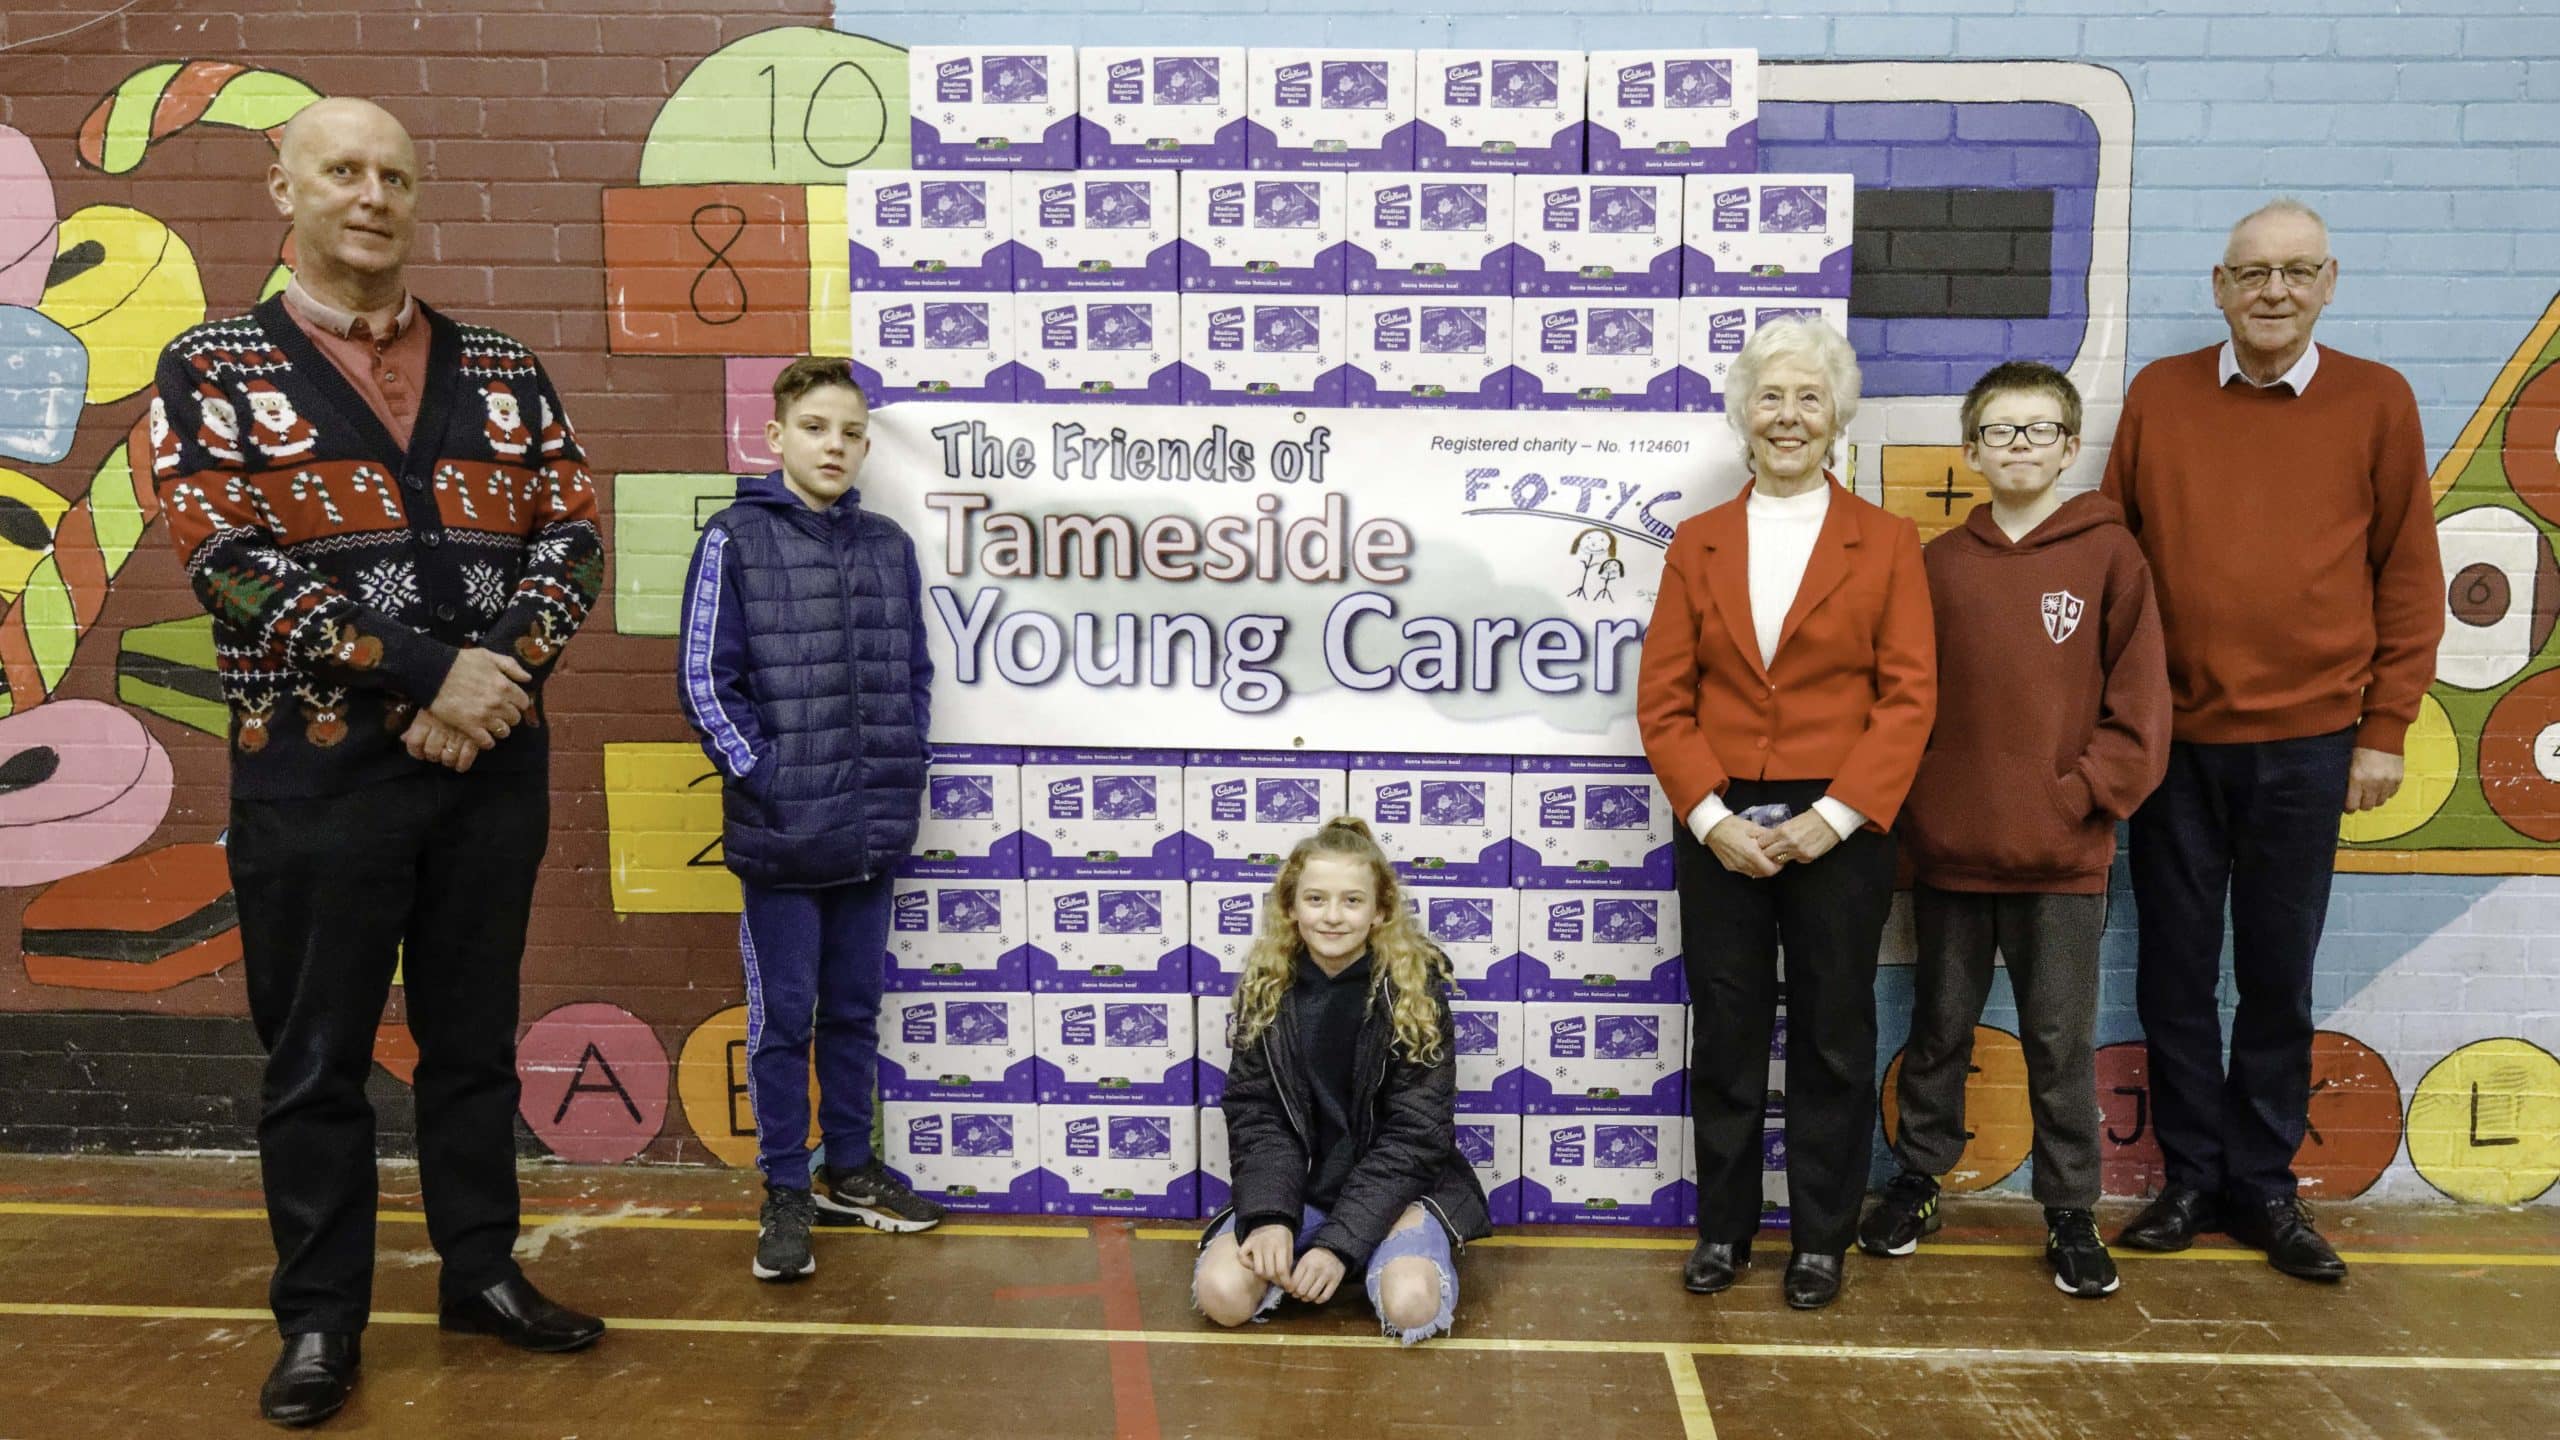 Tameside Young Carers